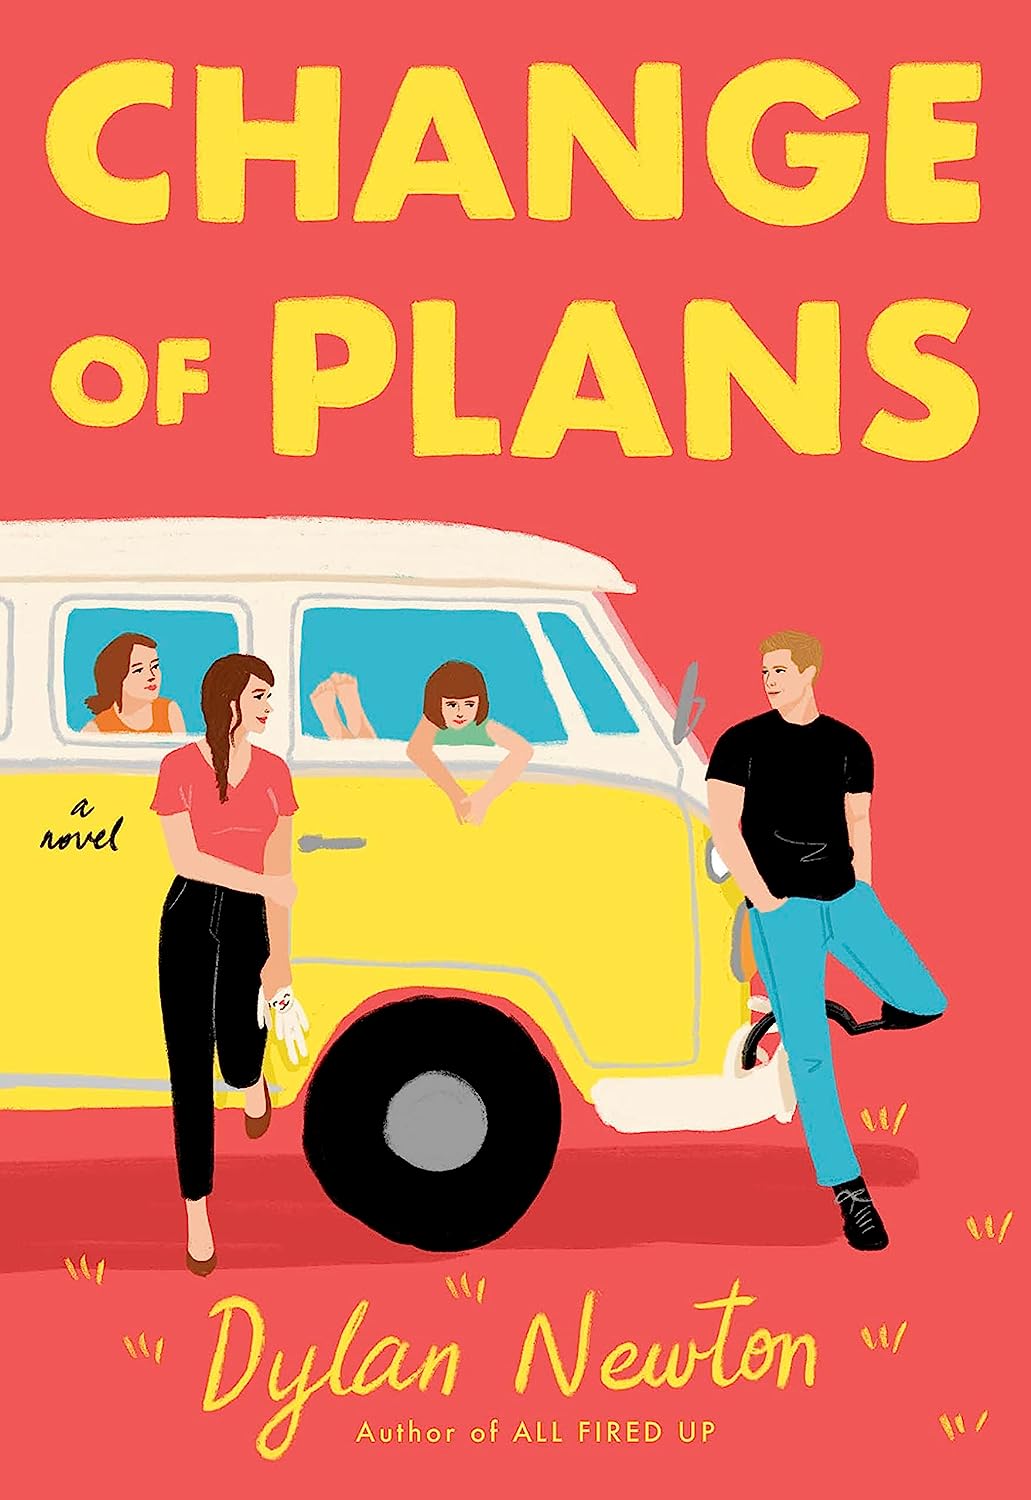 CHANGE OF PLANS by Dylan Newton